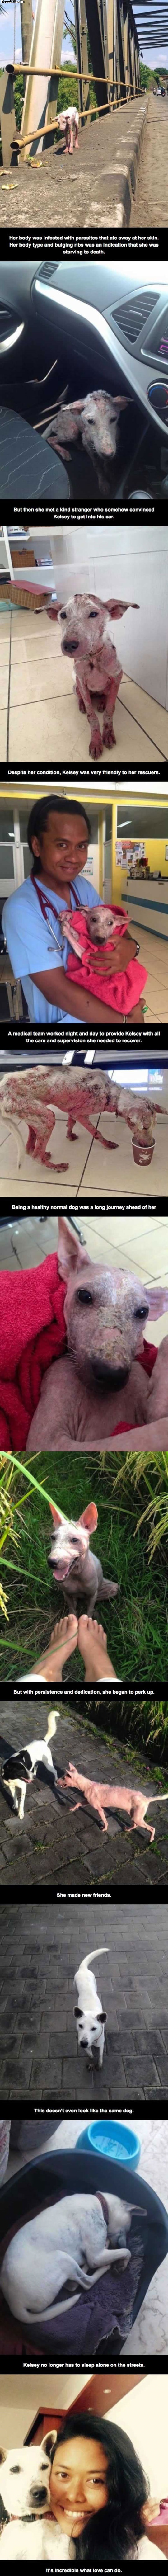 animal_rescues_are_one_of_the_few_good_things_about_people.jpg